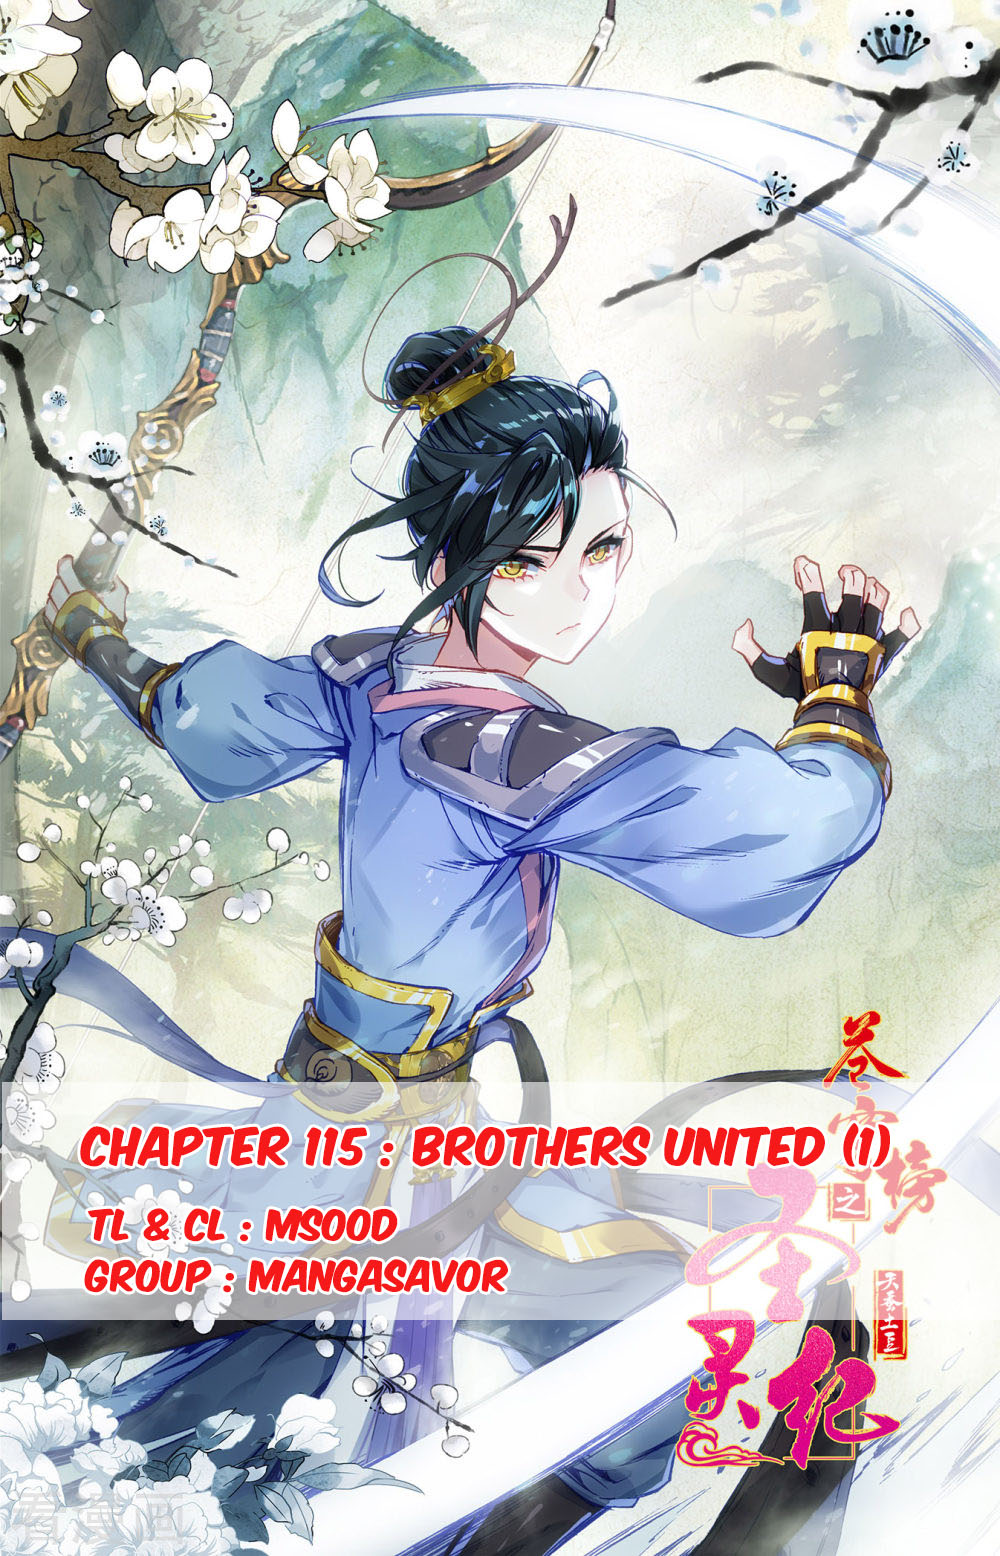 The Heaven's List Ch. 115 Brothers United (1)